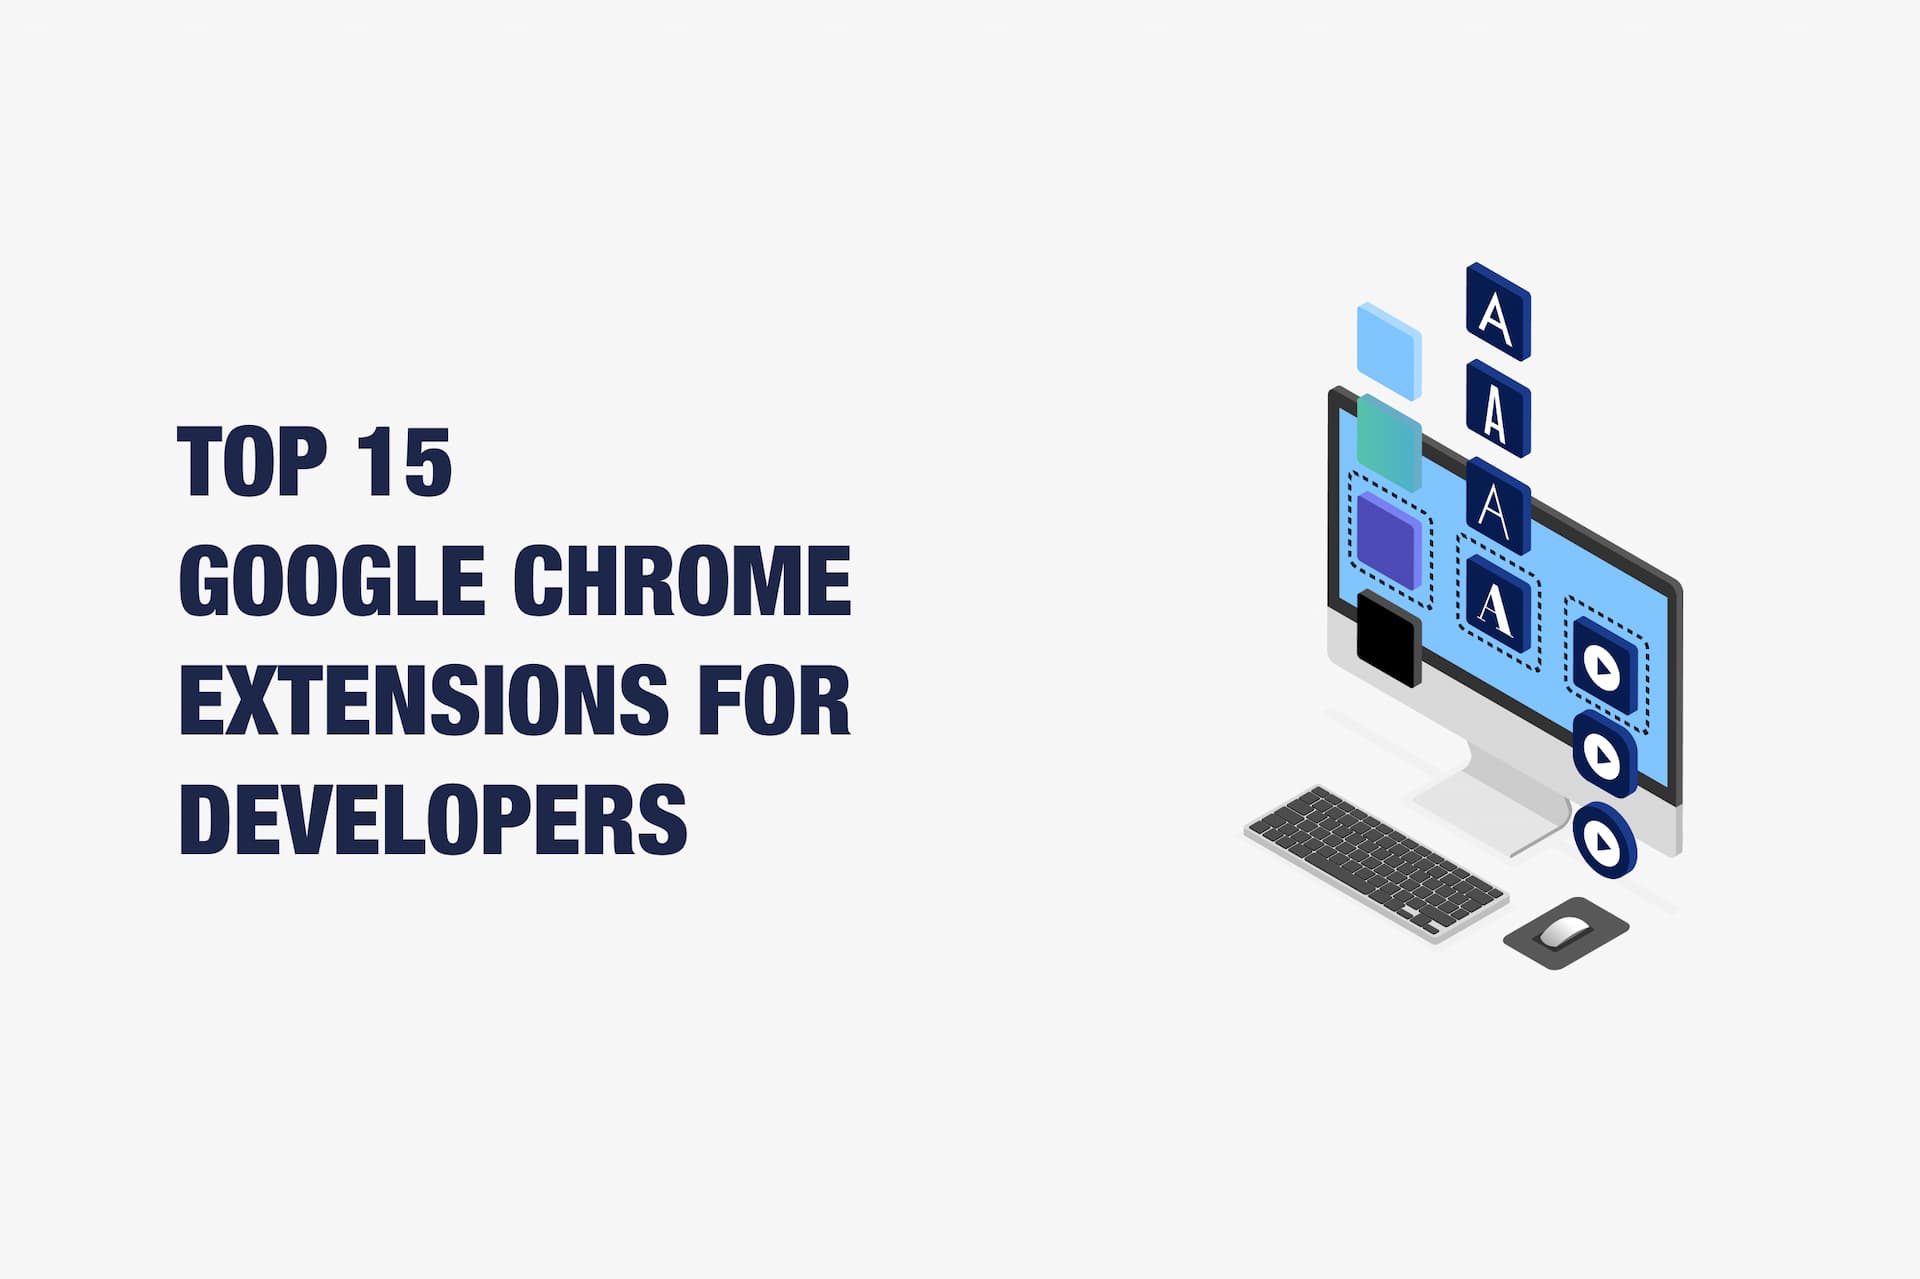 Top 15 Google Chrome Extensions for Developers